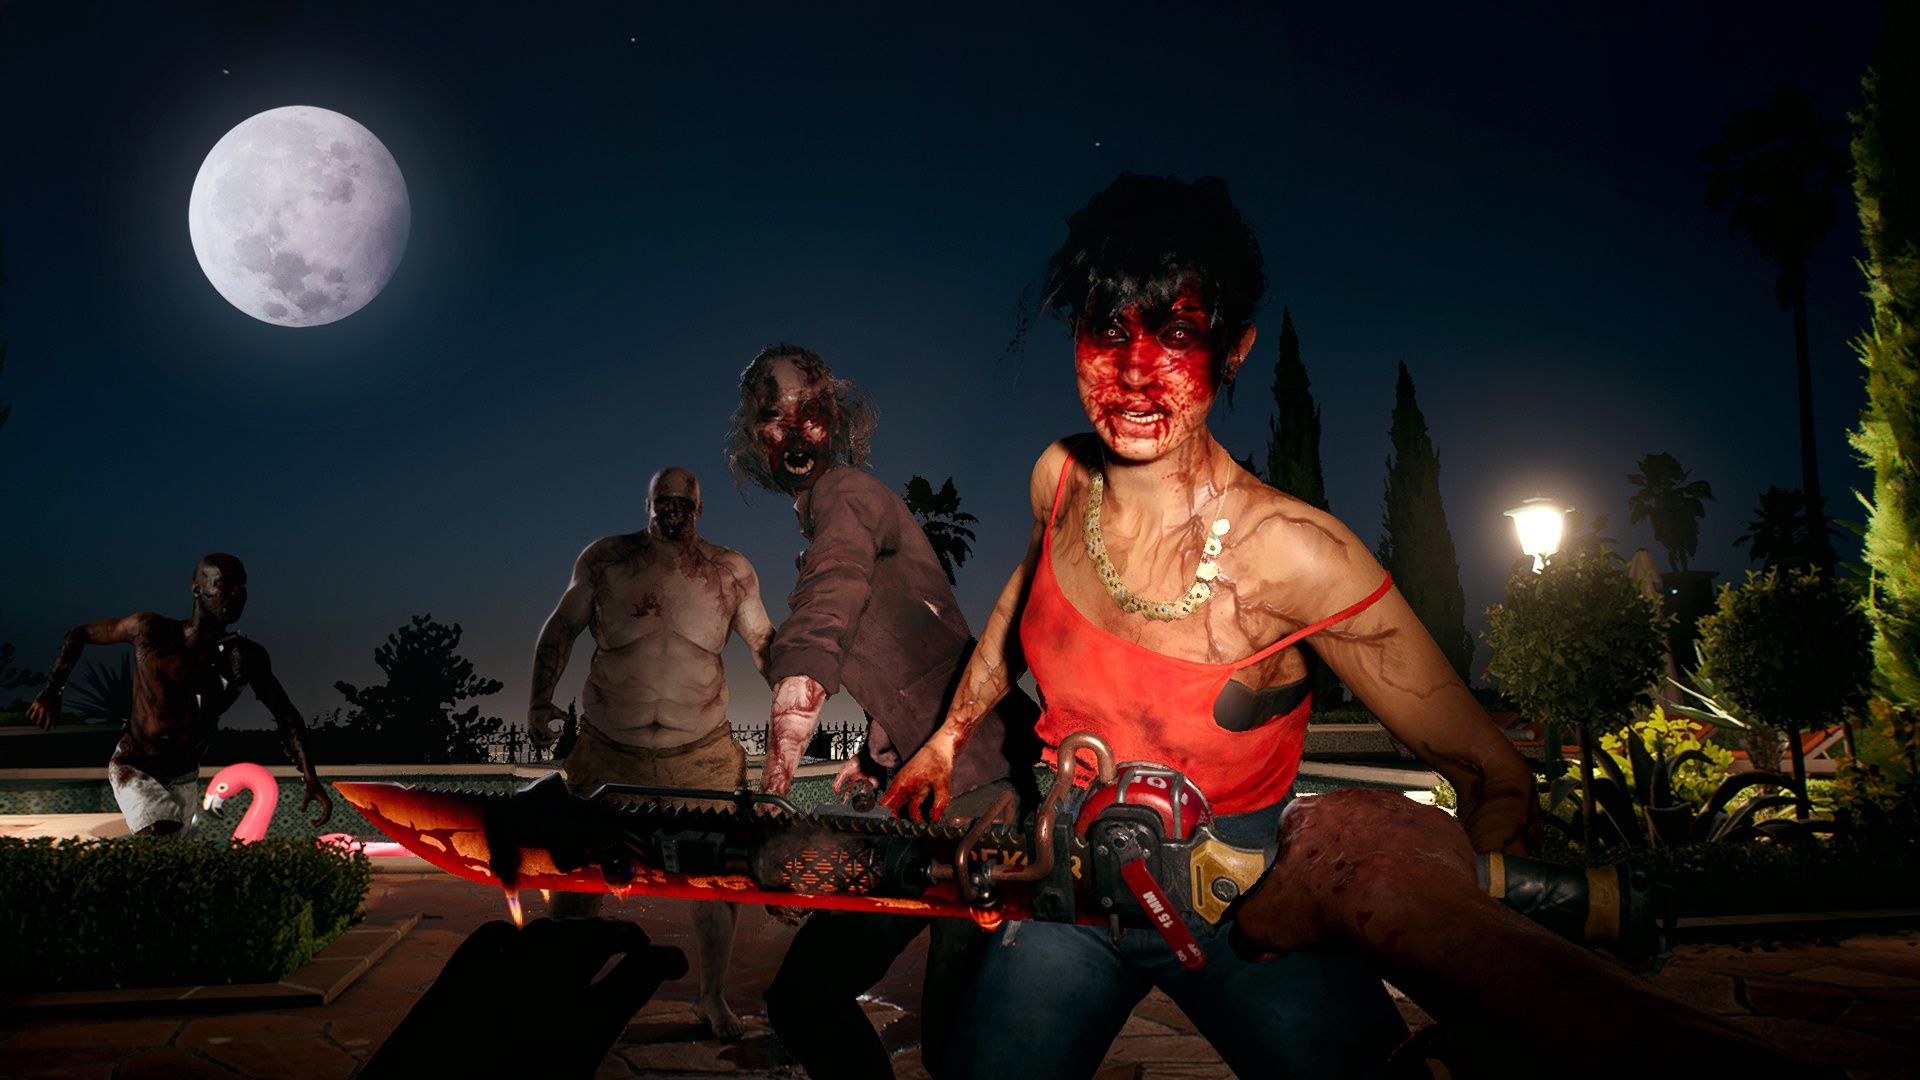 (If you flail wildly, you''ll quickly end up as zombie fodder in Dead Island 2. The combat system is simple, but challenging at the same time.)